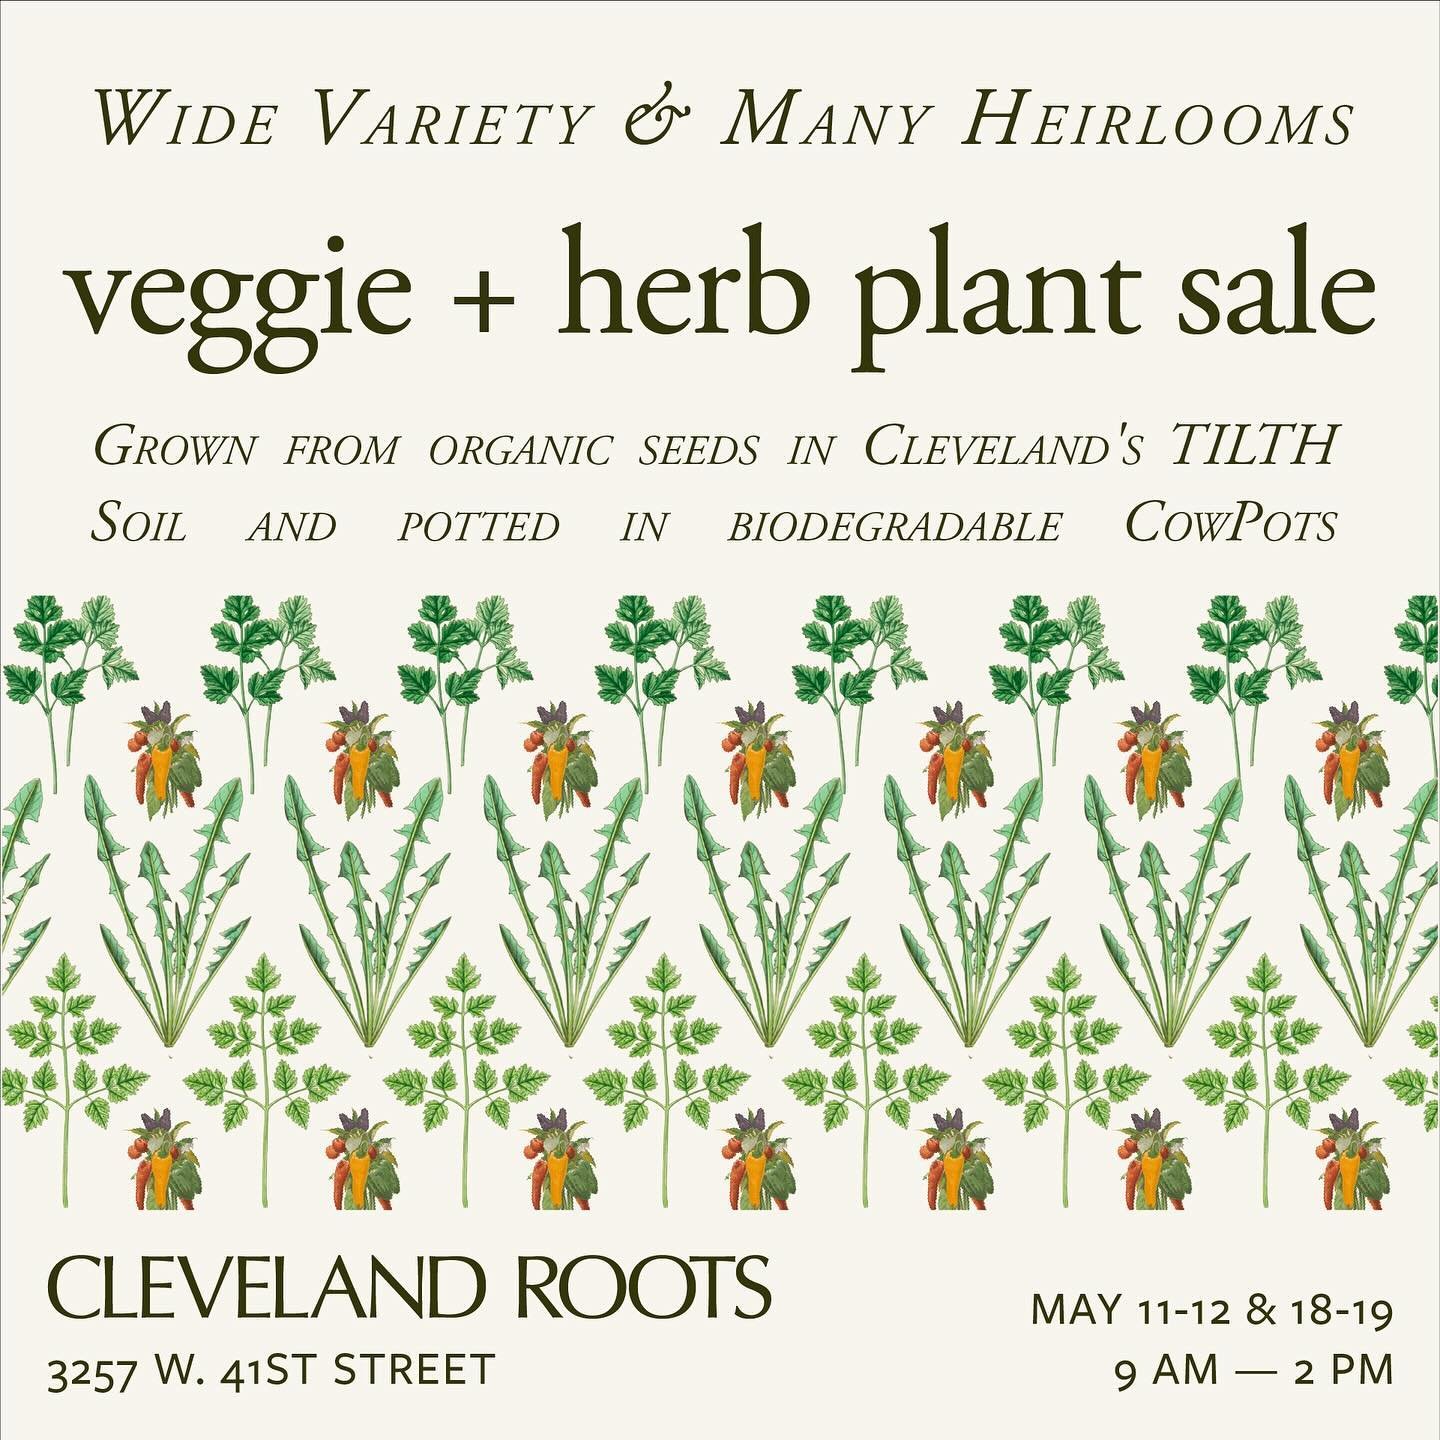 Woot woooot it's that time again...THE CLEVELAND ROOTS VEGGIE &amp; HERB PLANT SALE!!! Save the dates: May 11-12 &amp; May 18-19. We hope to see you there!